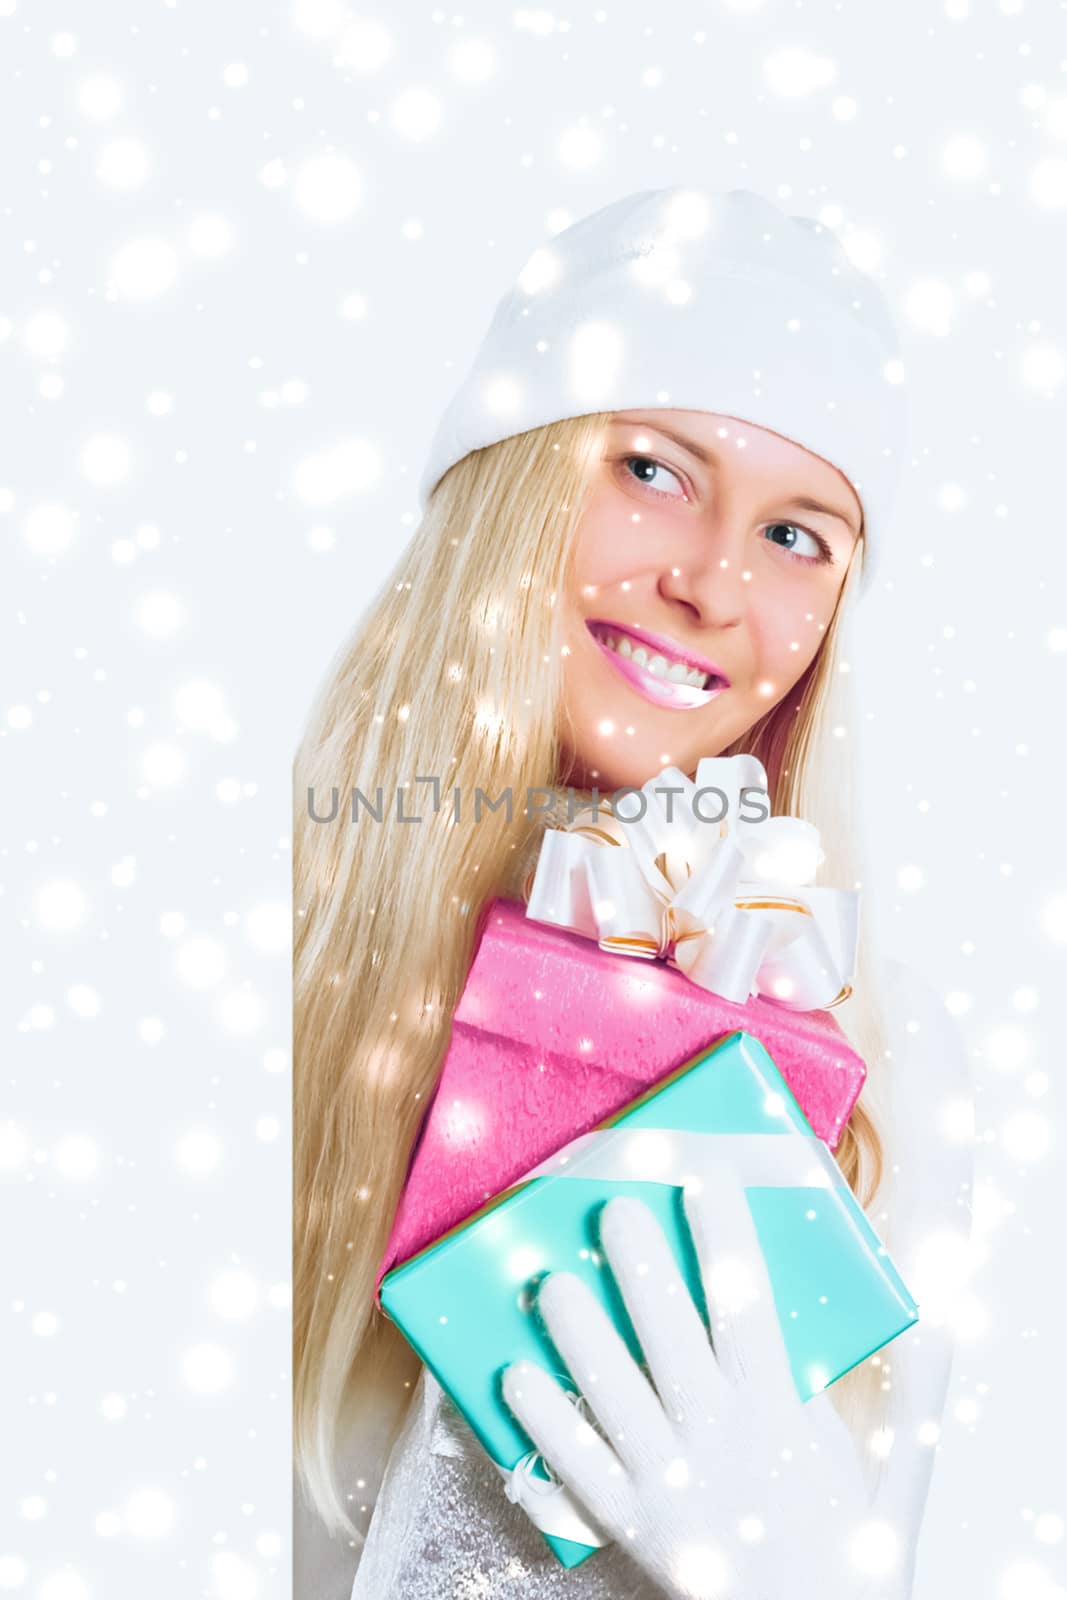 Happy woman holding Christmas gifts, silver background and snow glitter with copyspace, shopping and holidays